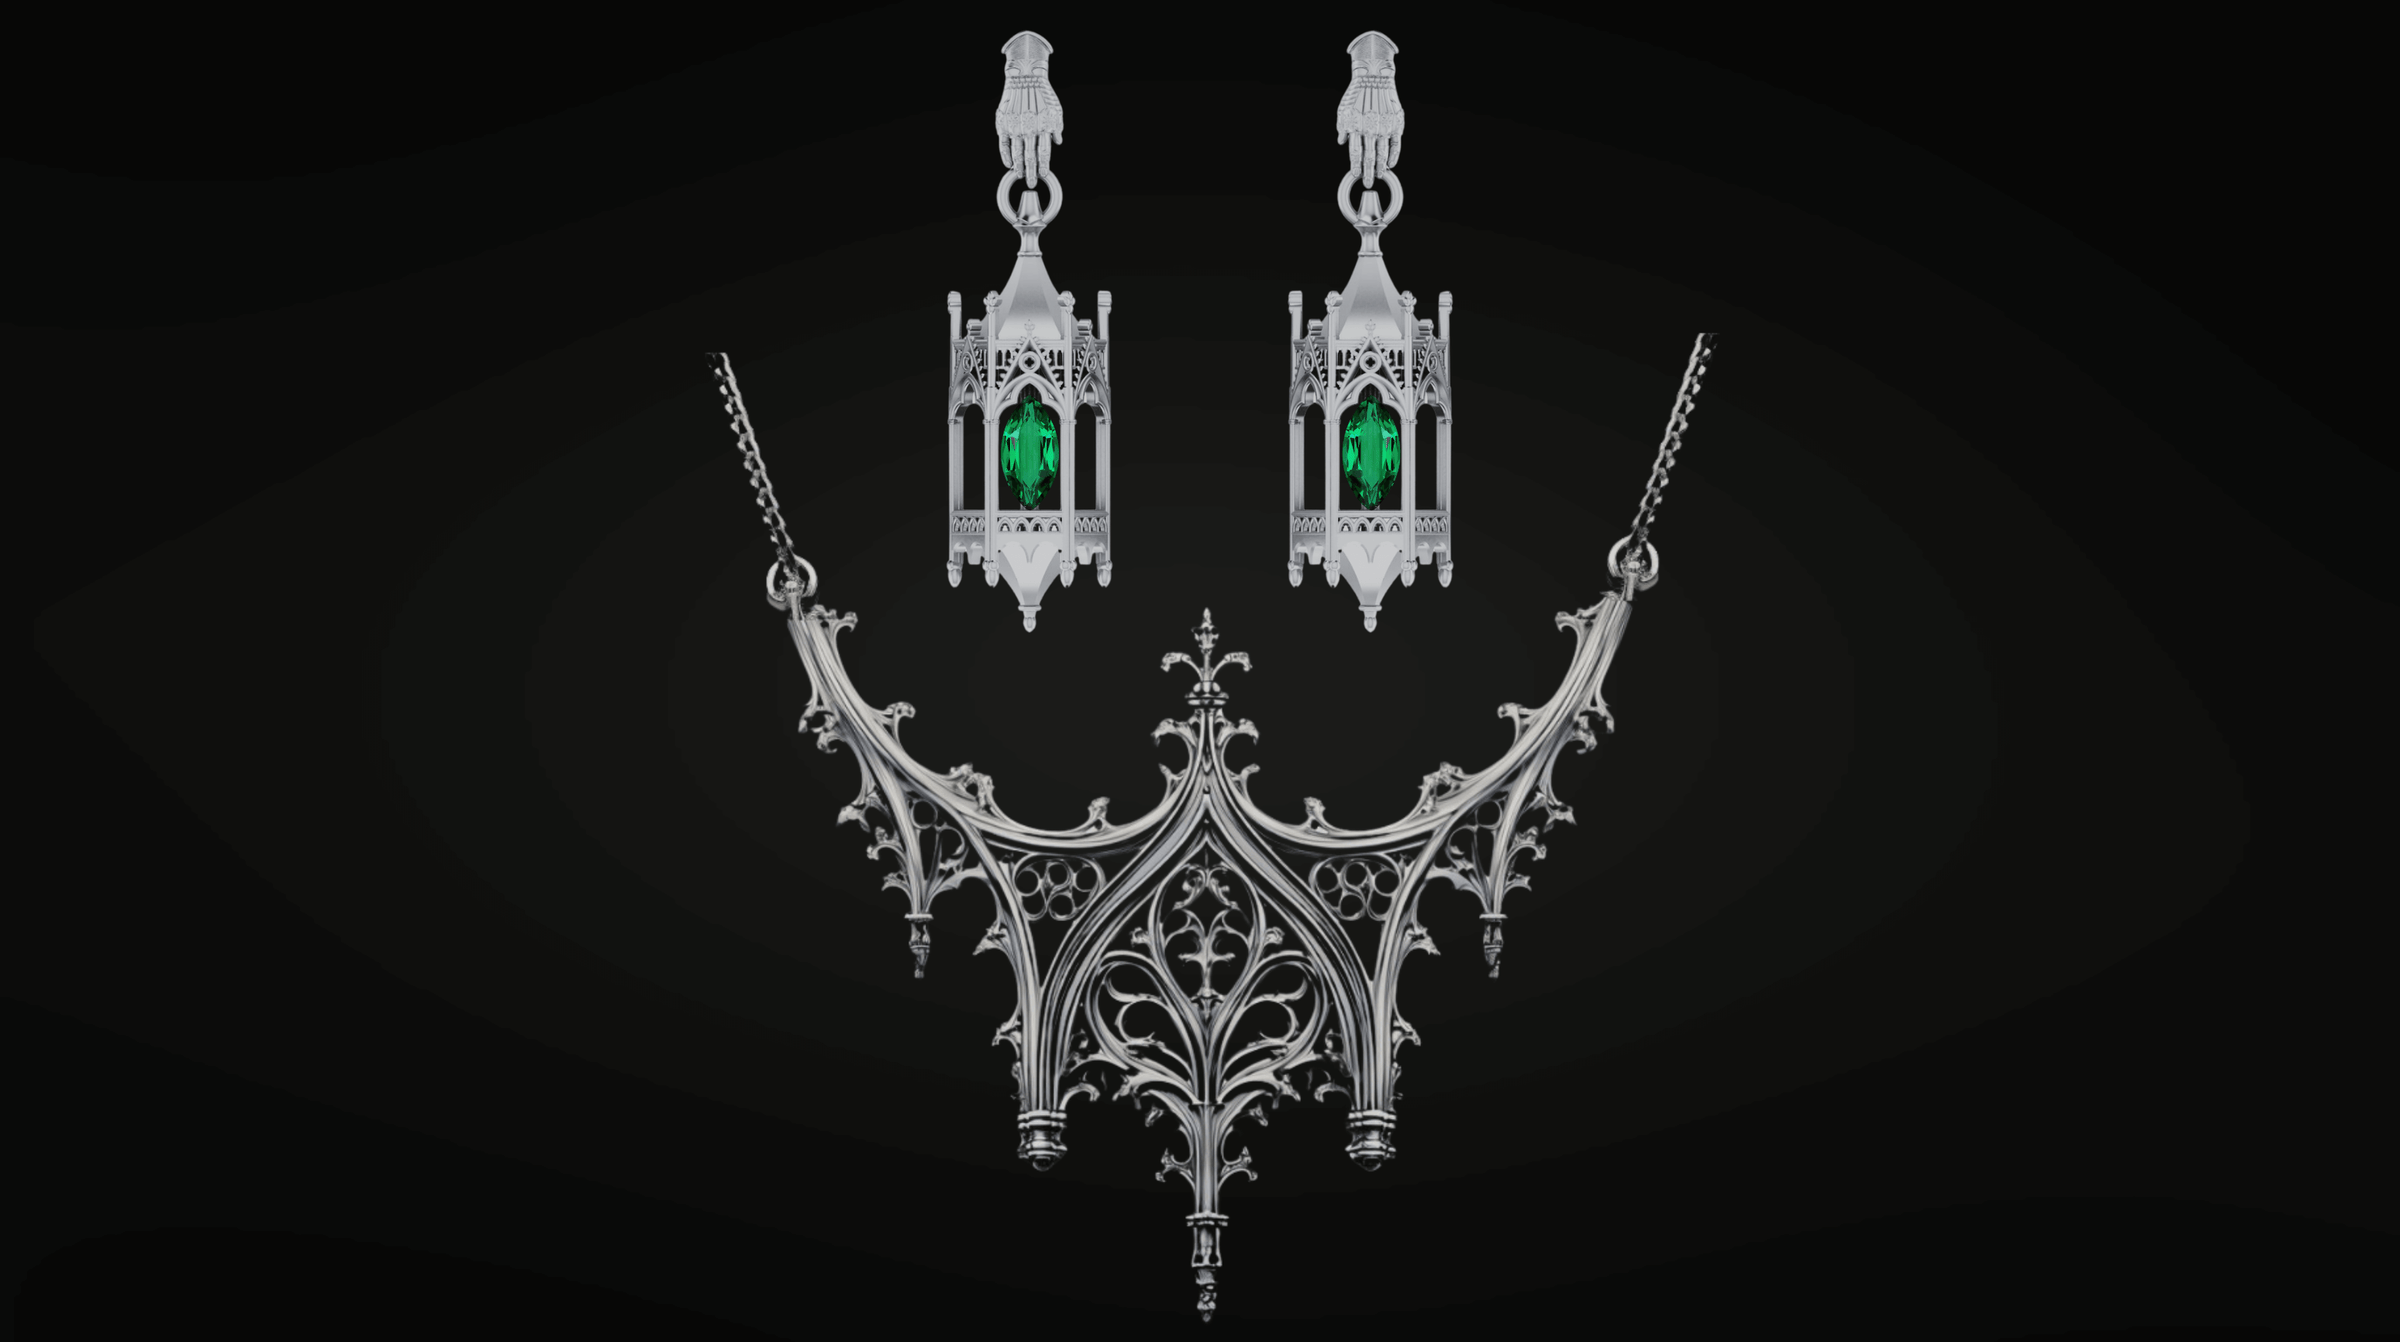 A cathedral necklace and Cathedral Lanterns